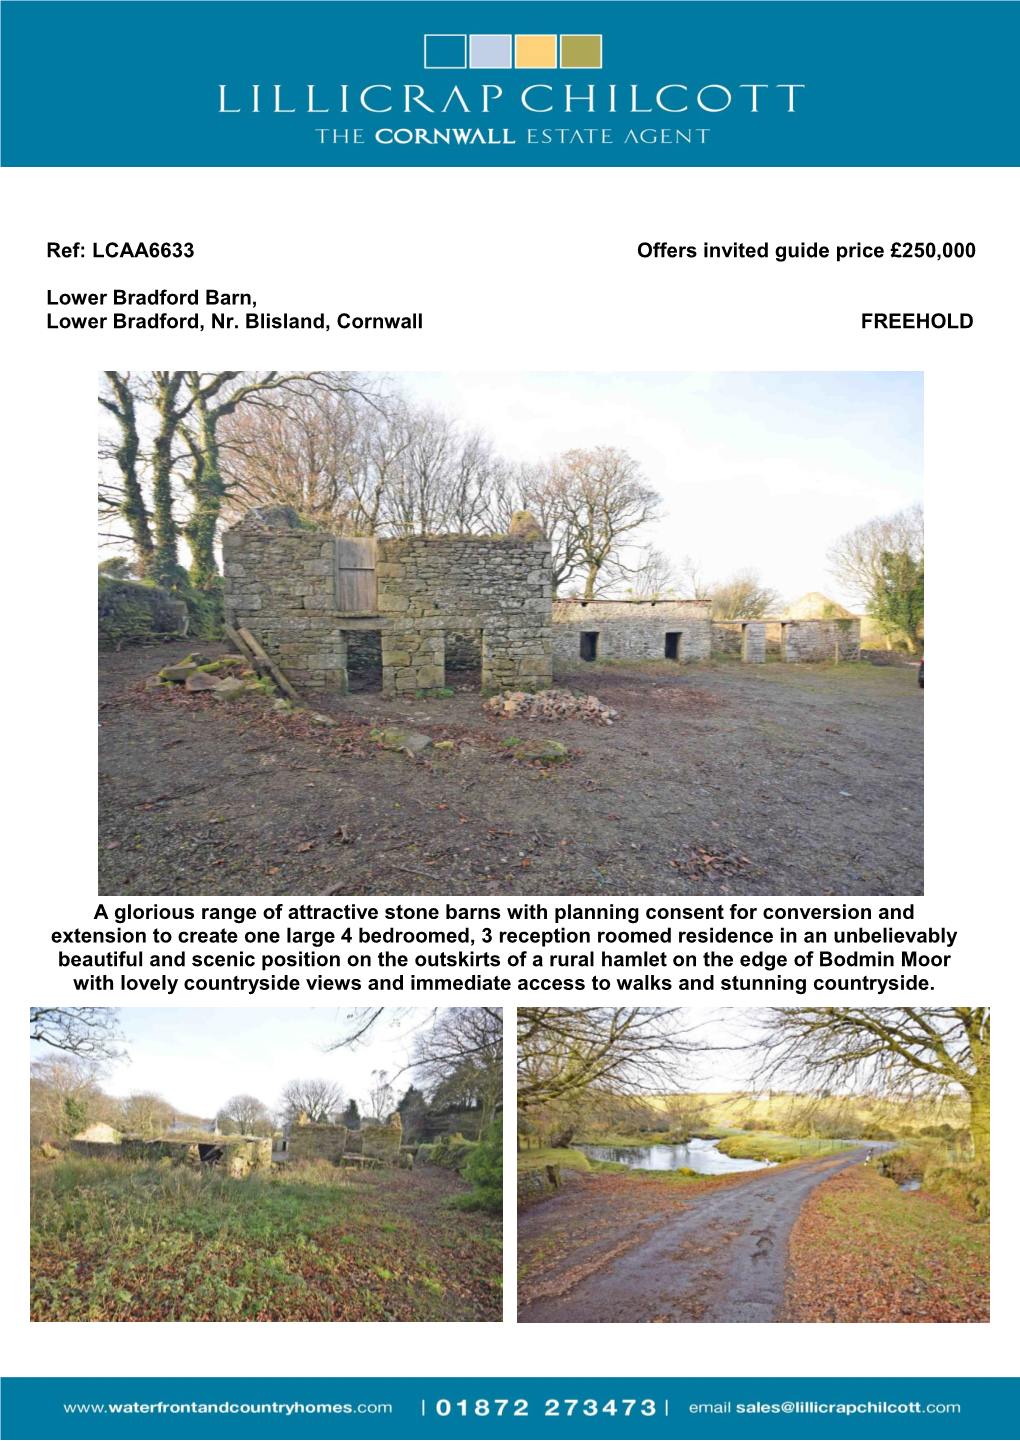 Ref: LCAA6633 Offers Invited Guide Price £250,000